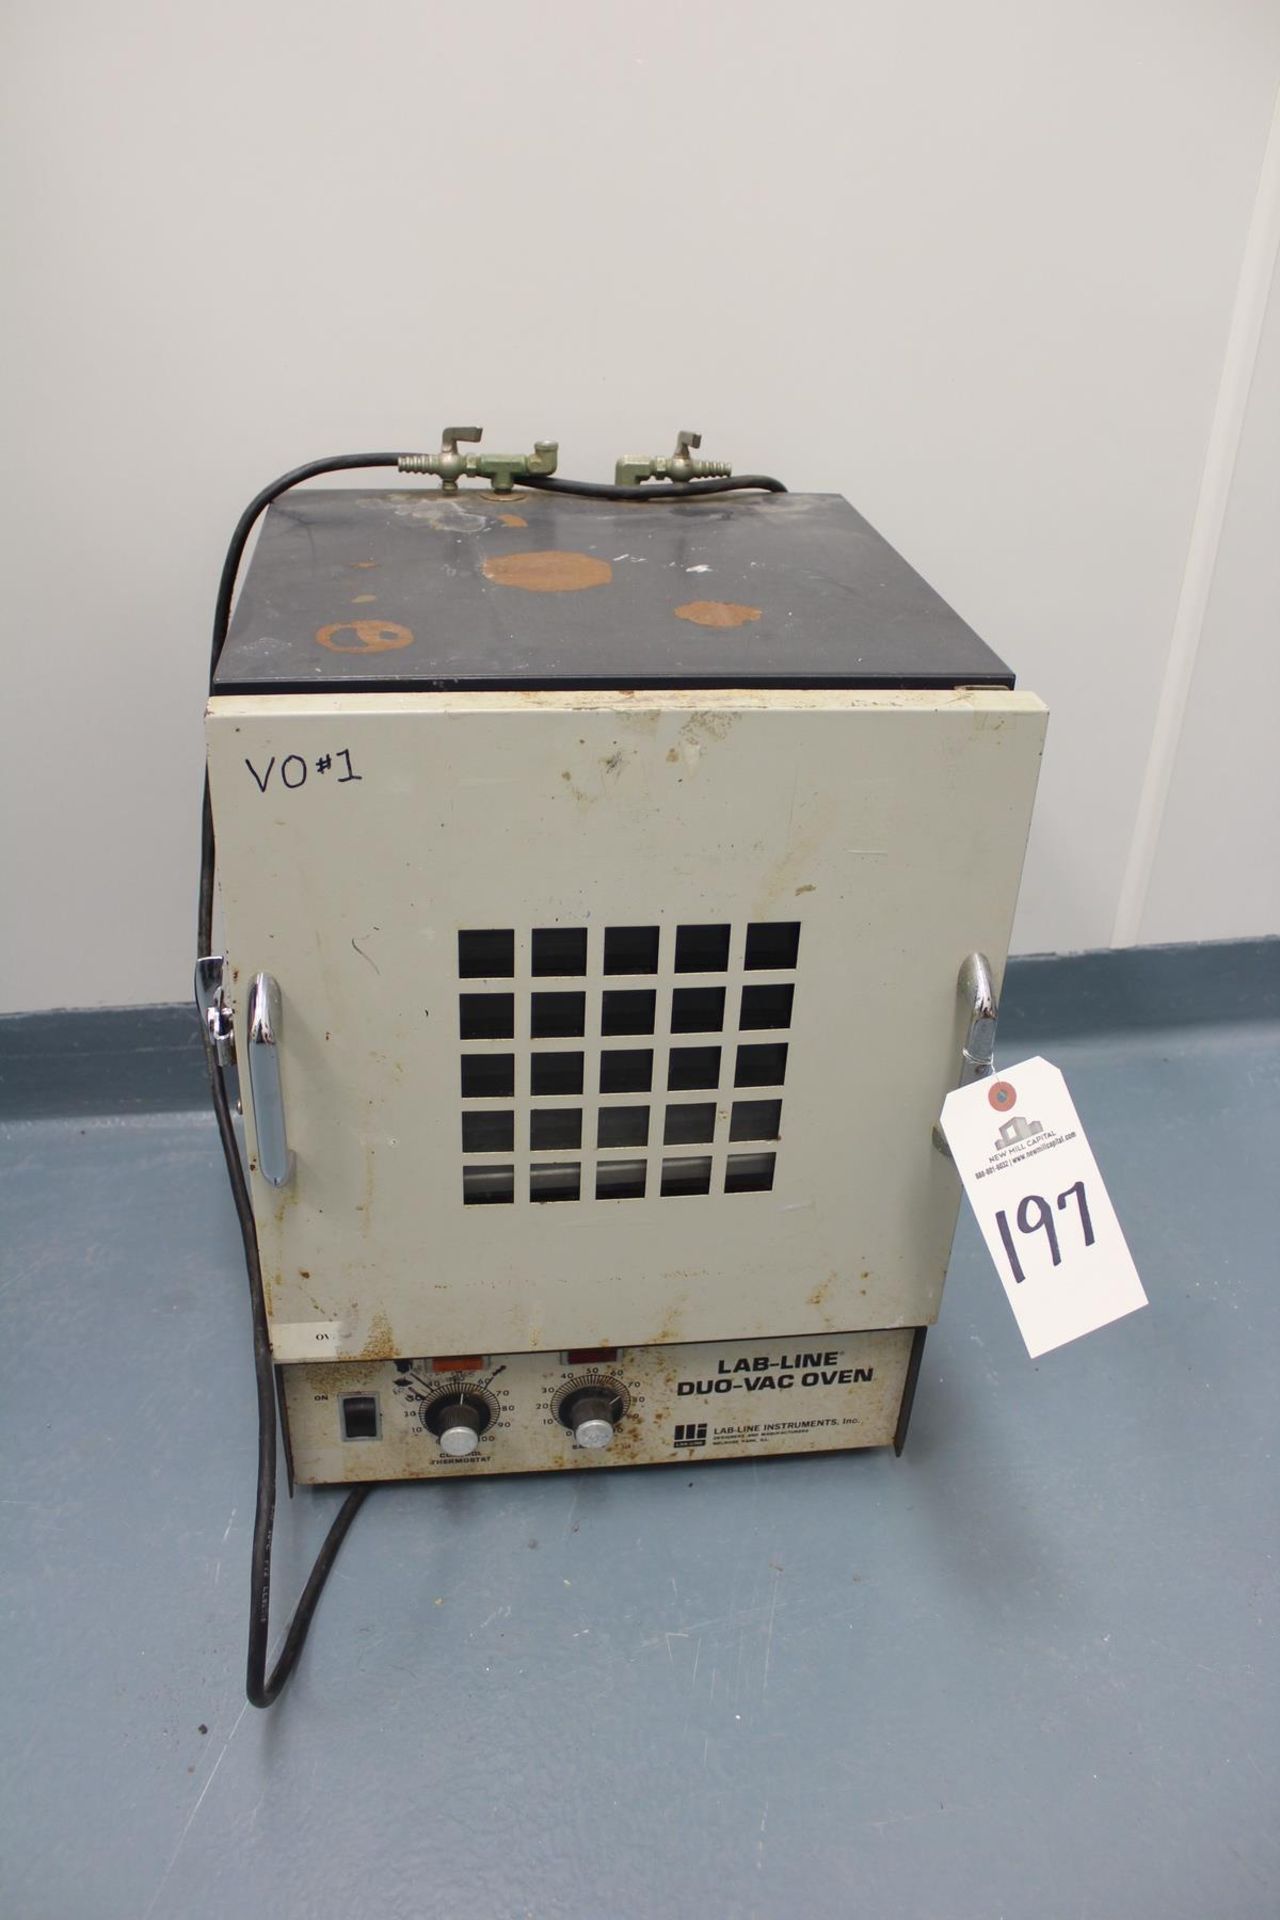 Lab-Line Duo-Vac Oven | Rig Fee: $20